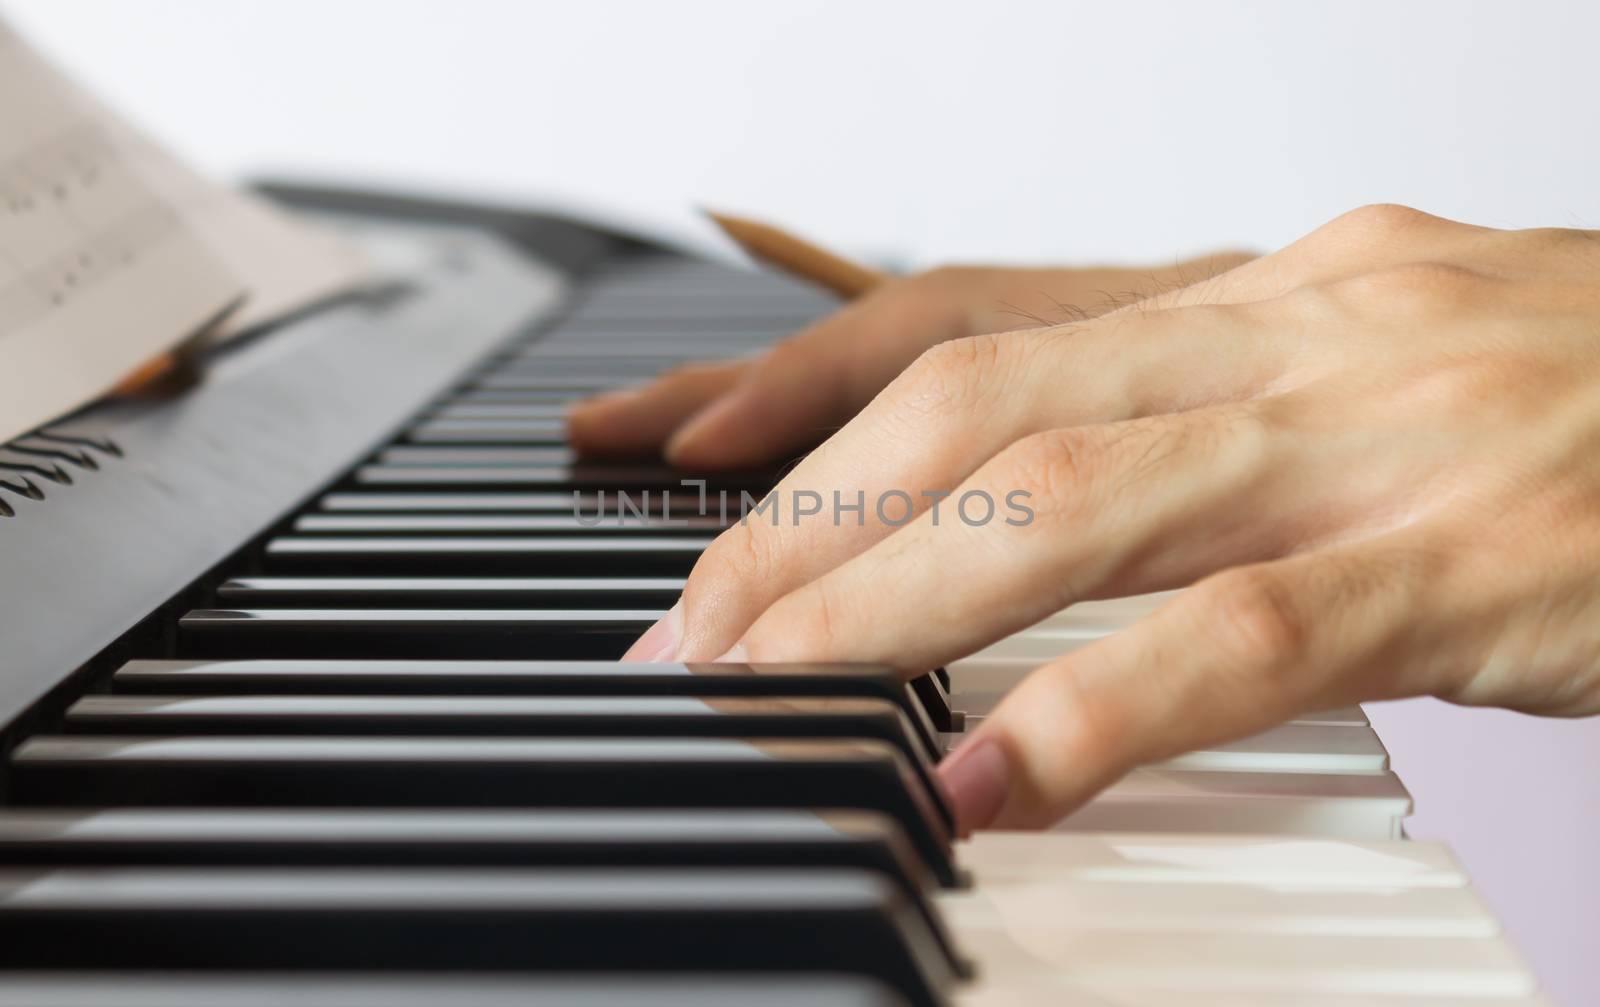 Hand of Piano Player on White Keys and Black Keys of Electric Piano with Sheet Music or Piano Staff